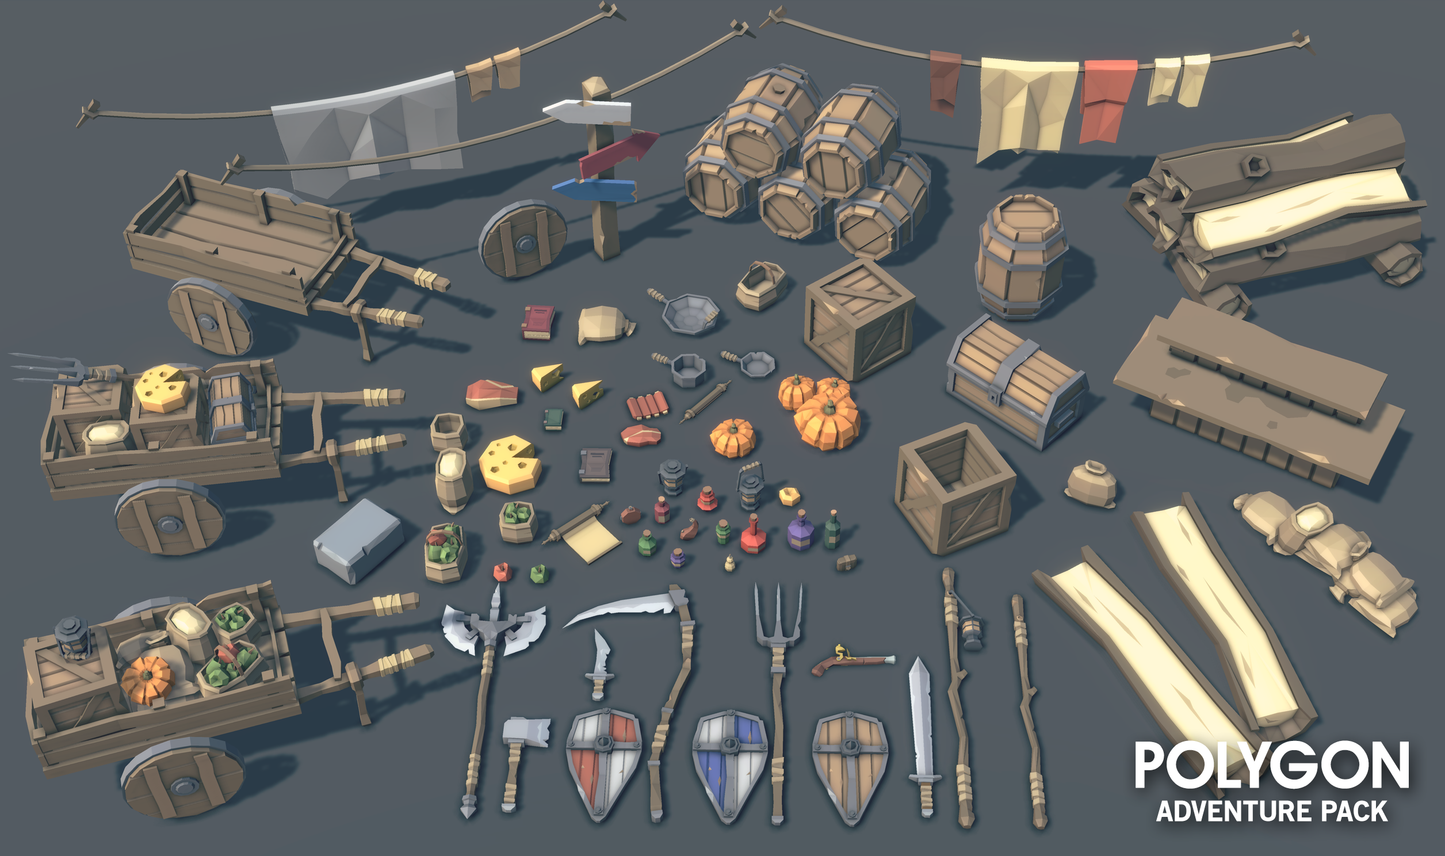 Low poly 3d game asset of medieval modular building pieces, fences, market stalls, barrels, carts and town signs